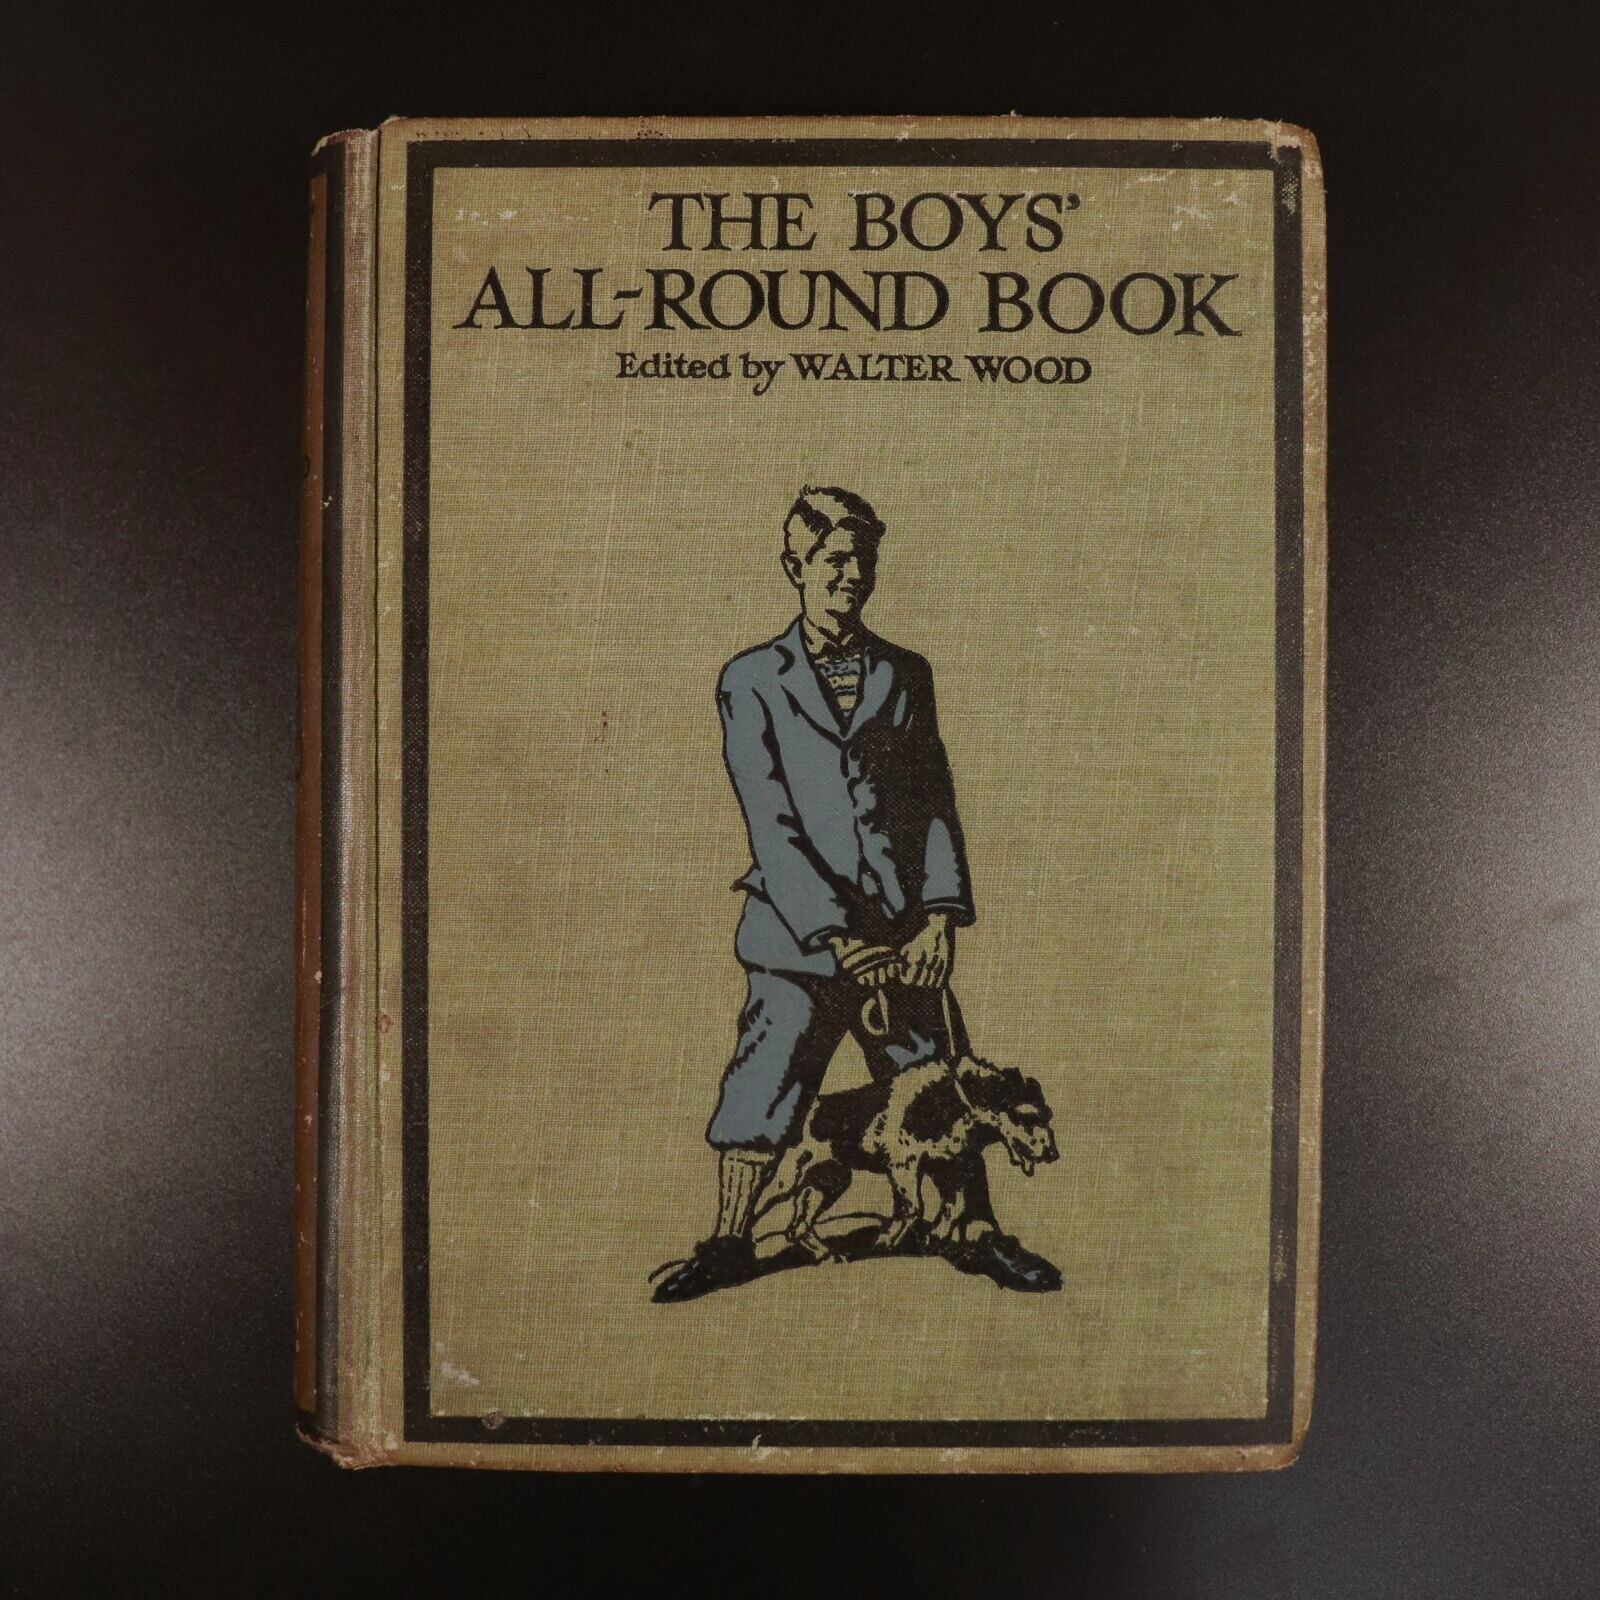 c1930 The Boys All-Round Book by Walter Wood Antique Illustrated Childrens Book